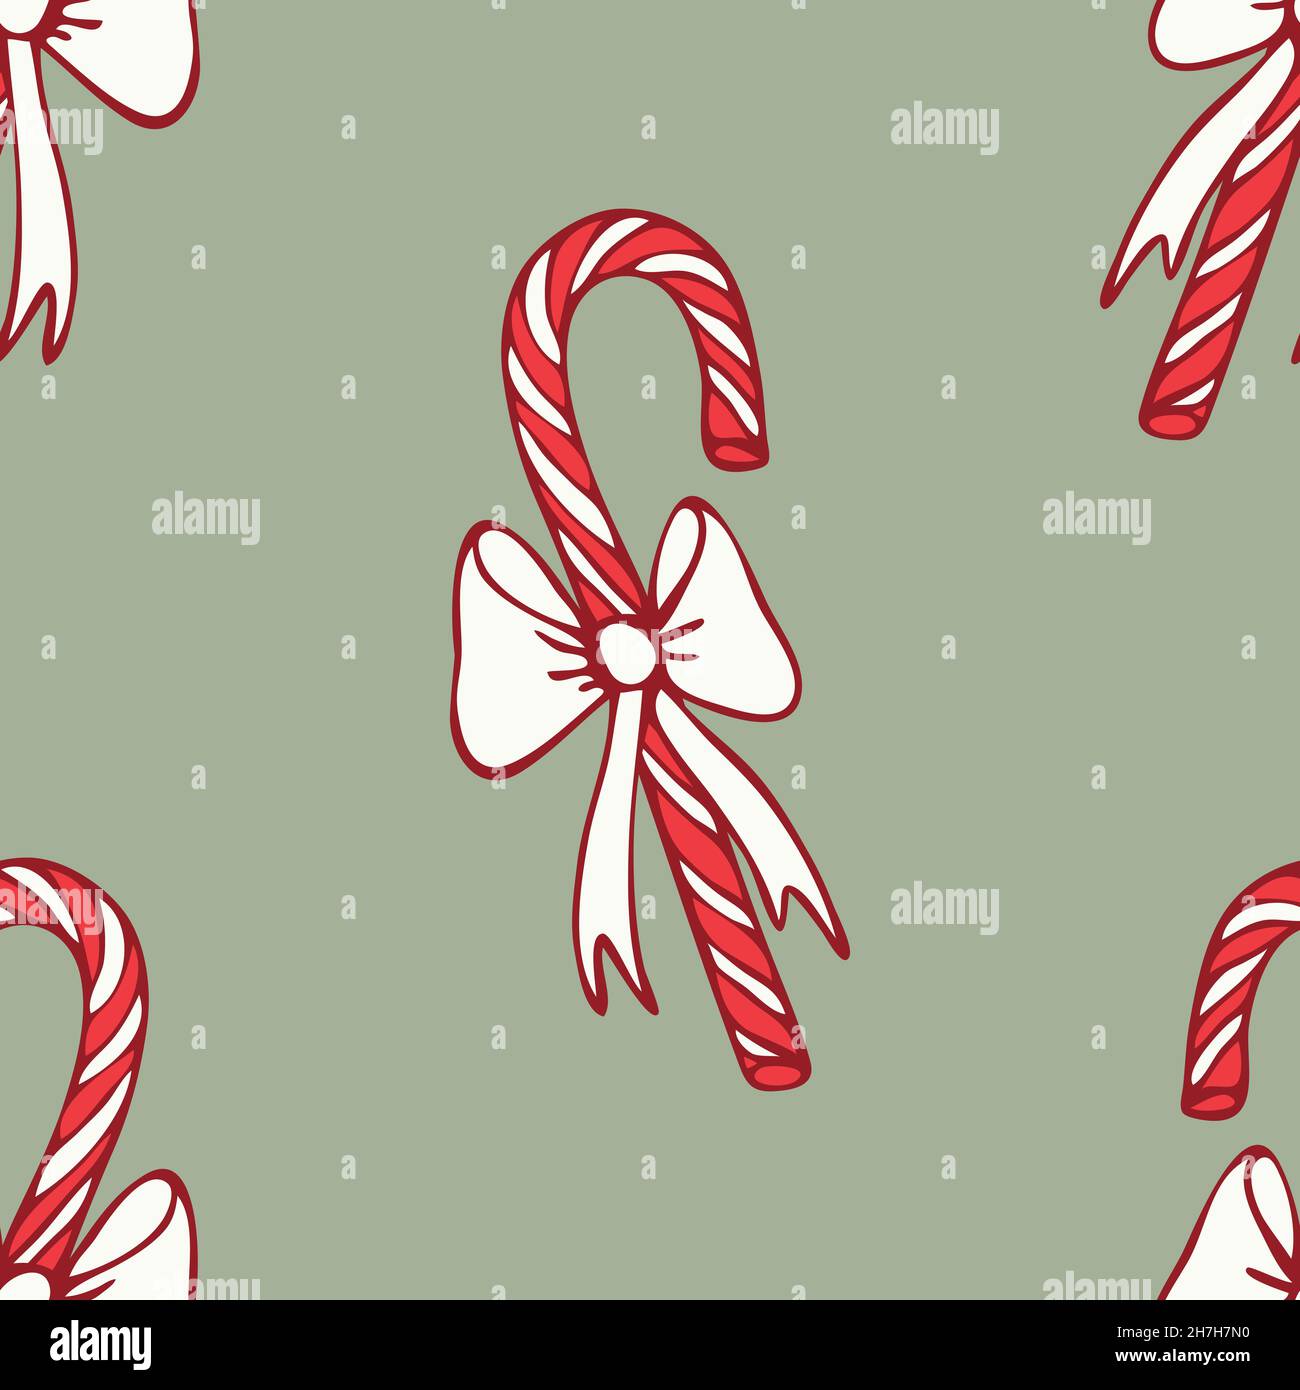 Seamless vector pattern with candy canes on green background. Fun Christmas sweet wallpaper design. Decorative winter festive fashion textile. Stock Vector